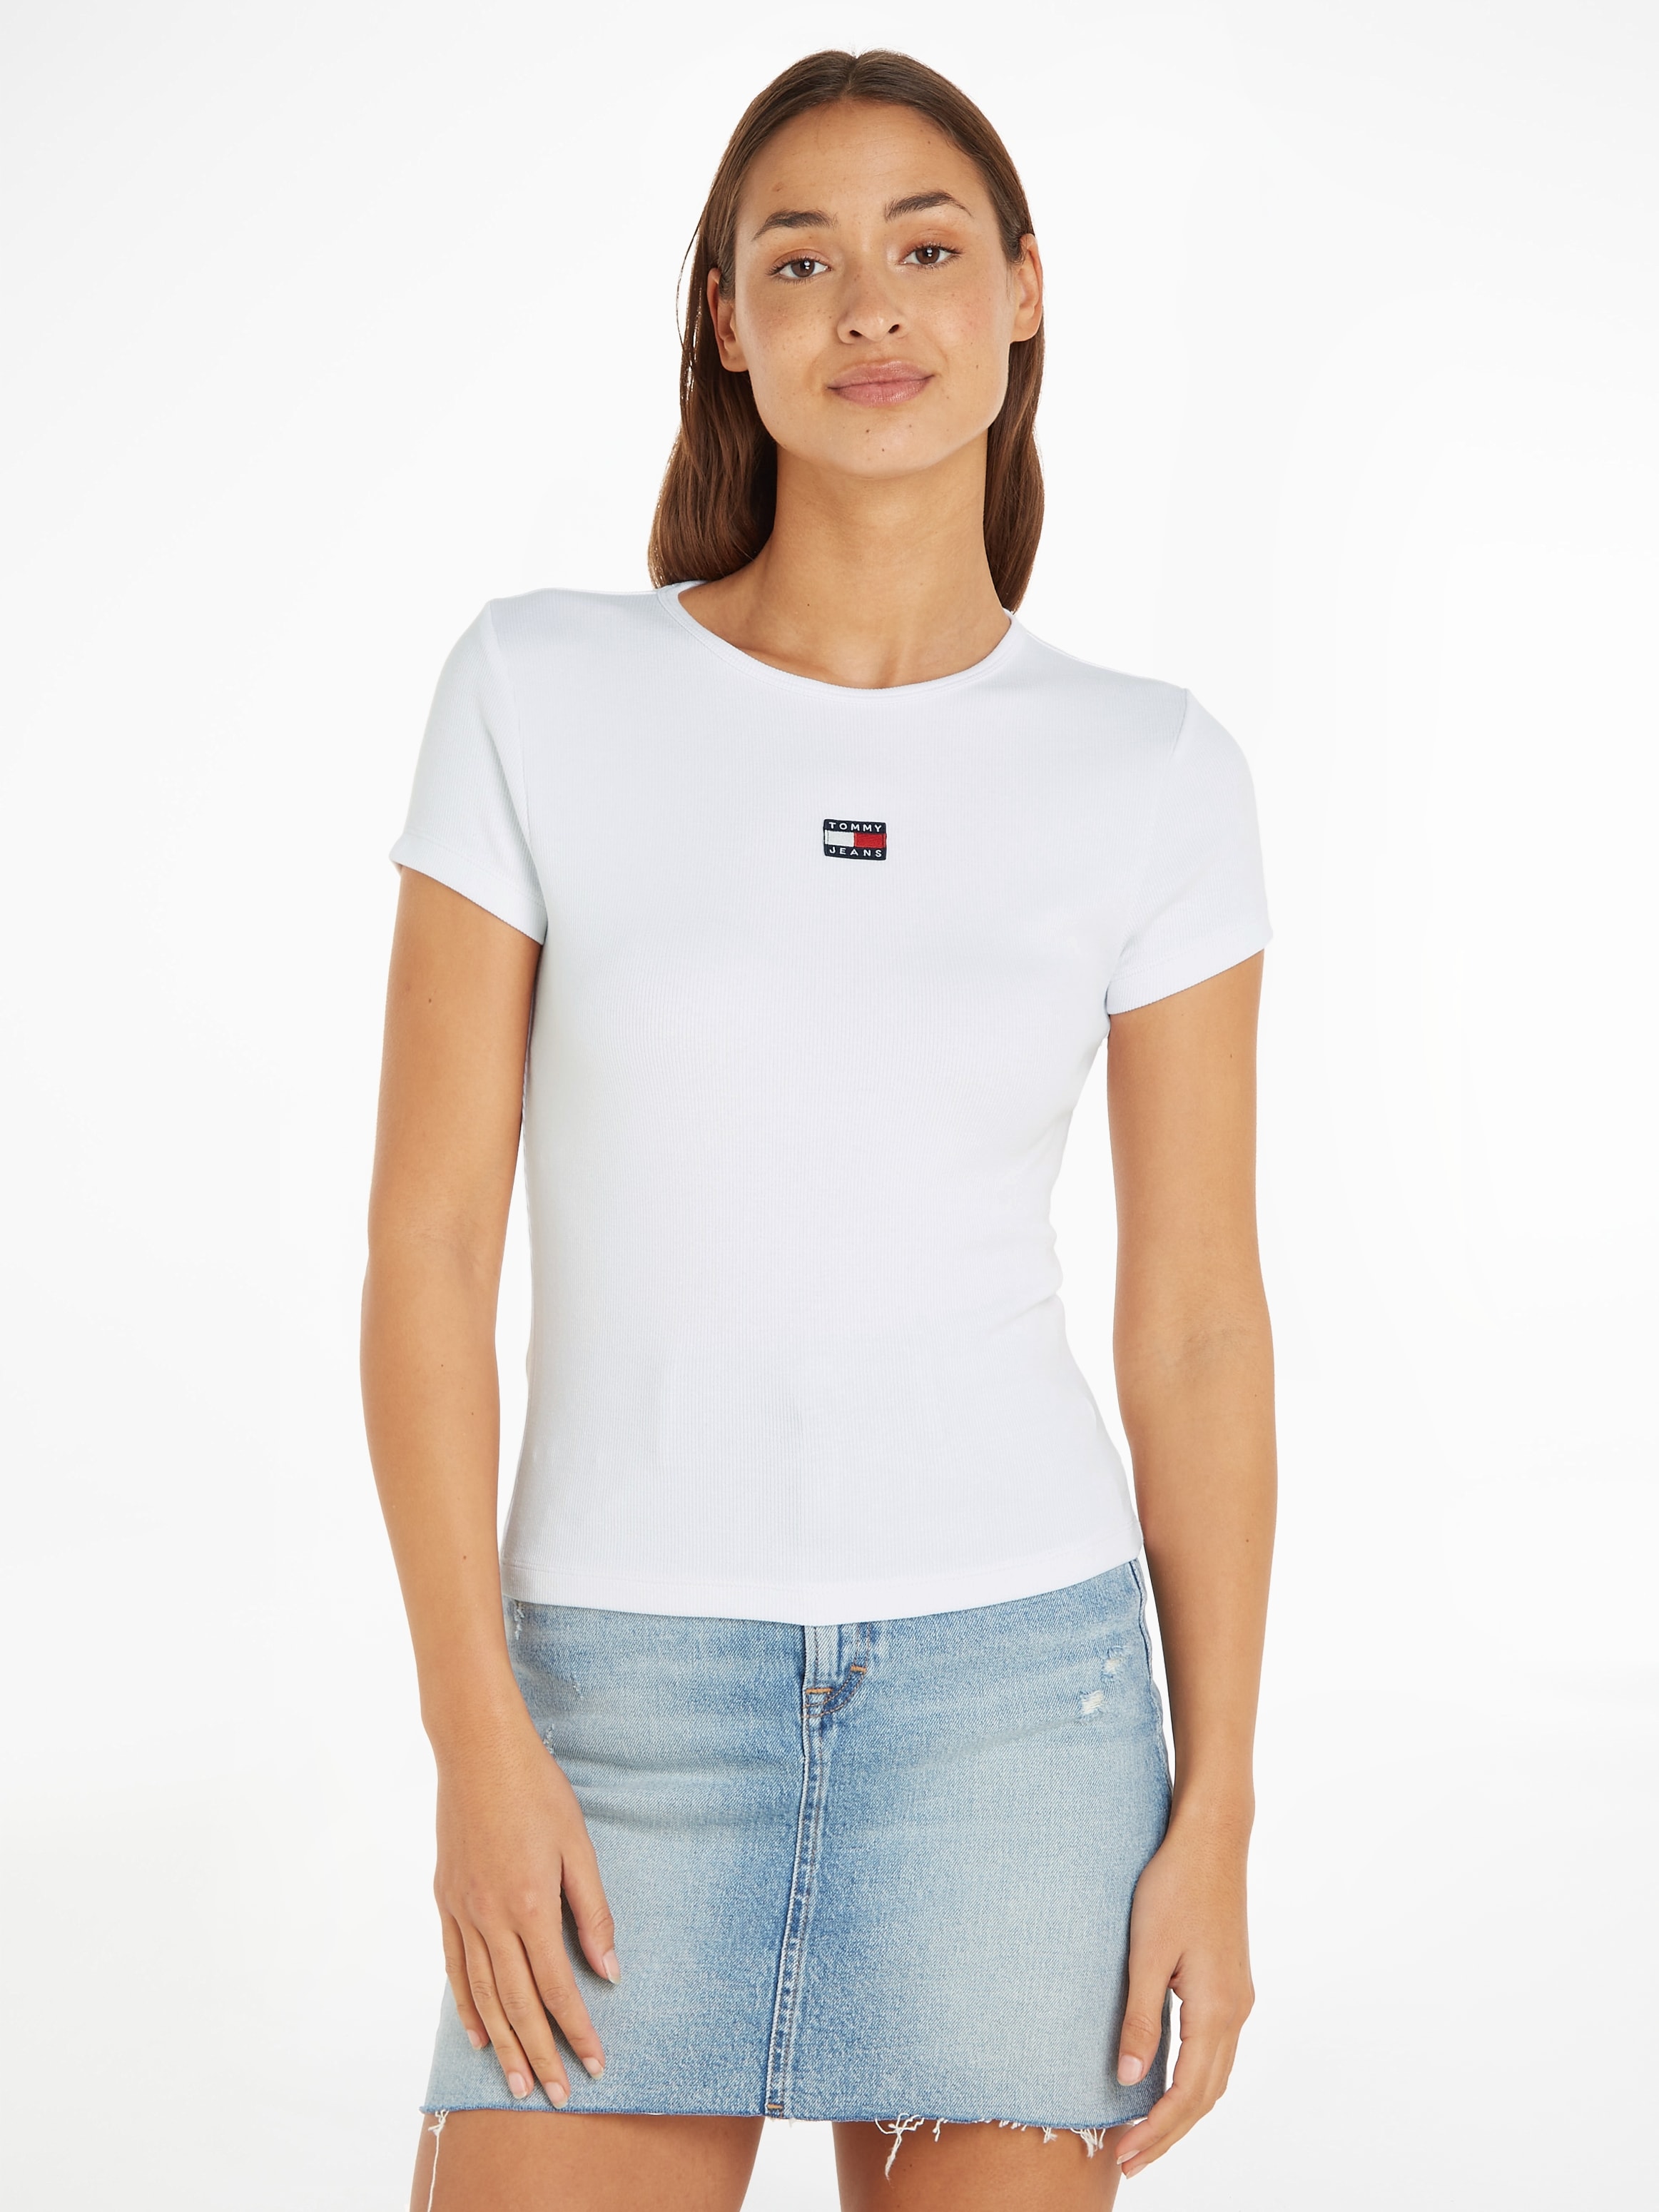 Tommy Jeans T-Shirt »TJW XS BBY Logobadge mit ♕ bei BADGE TEE«, RIB